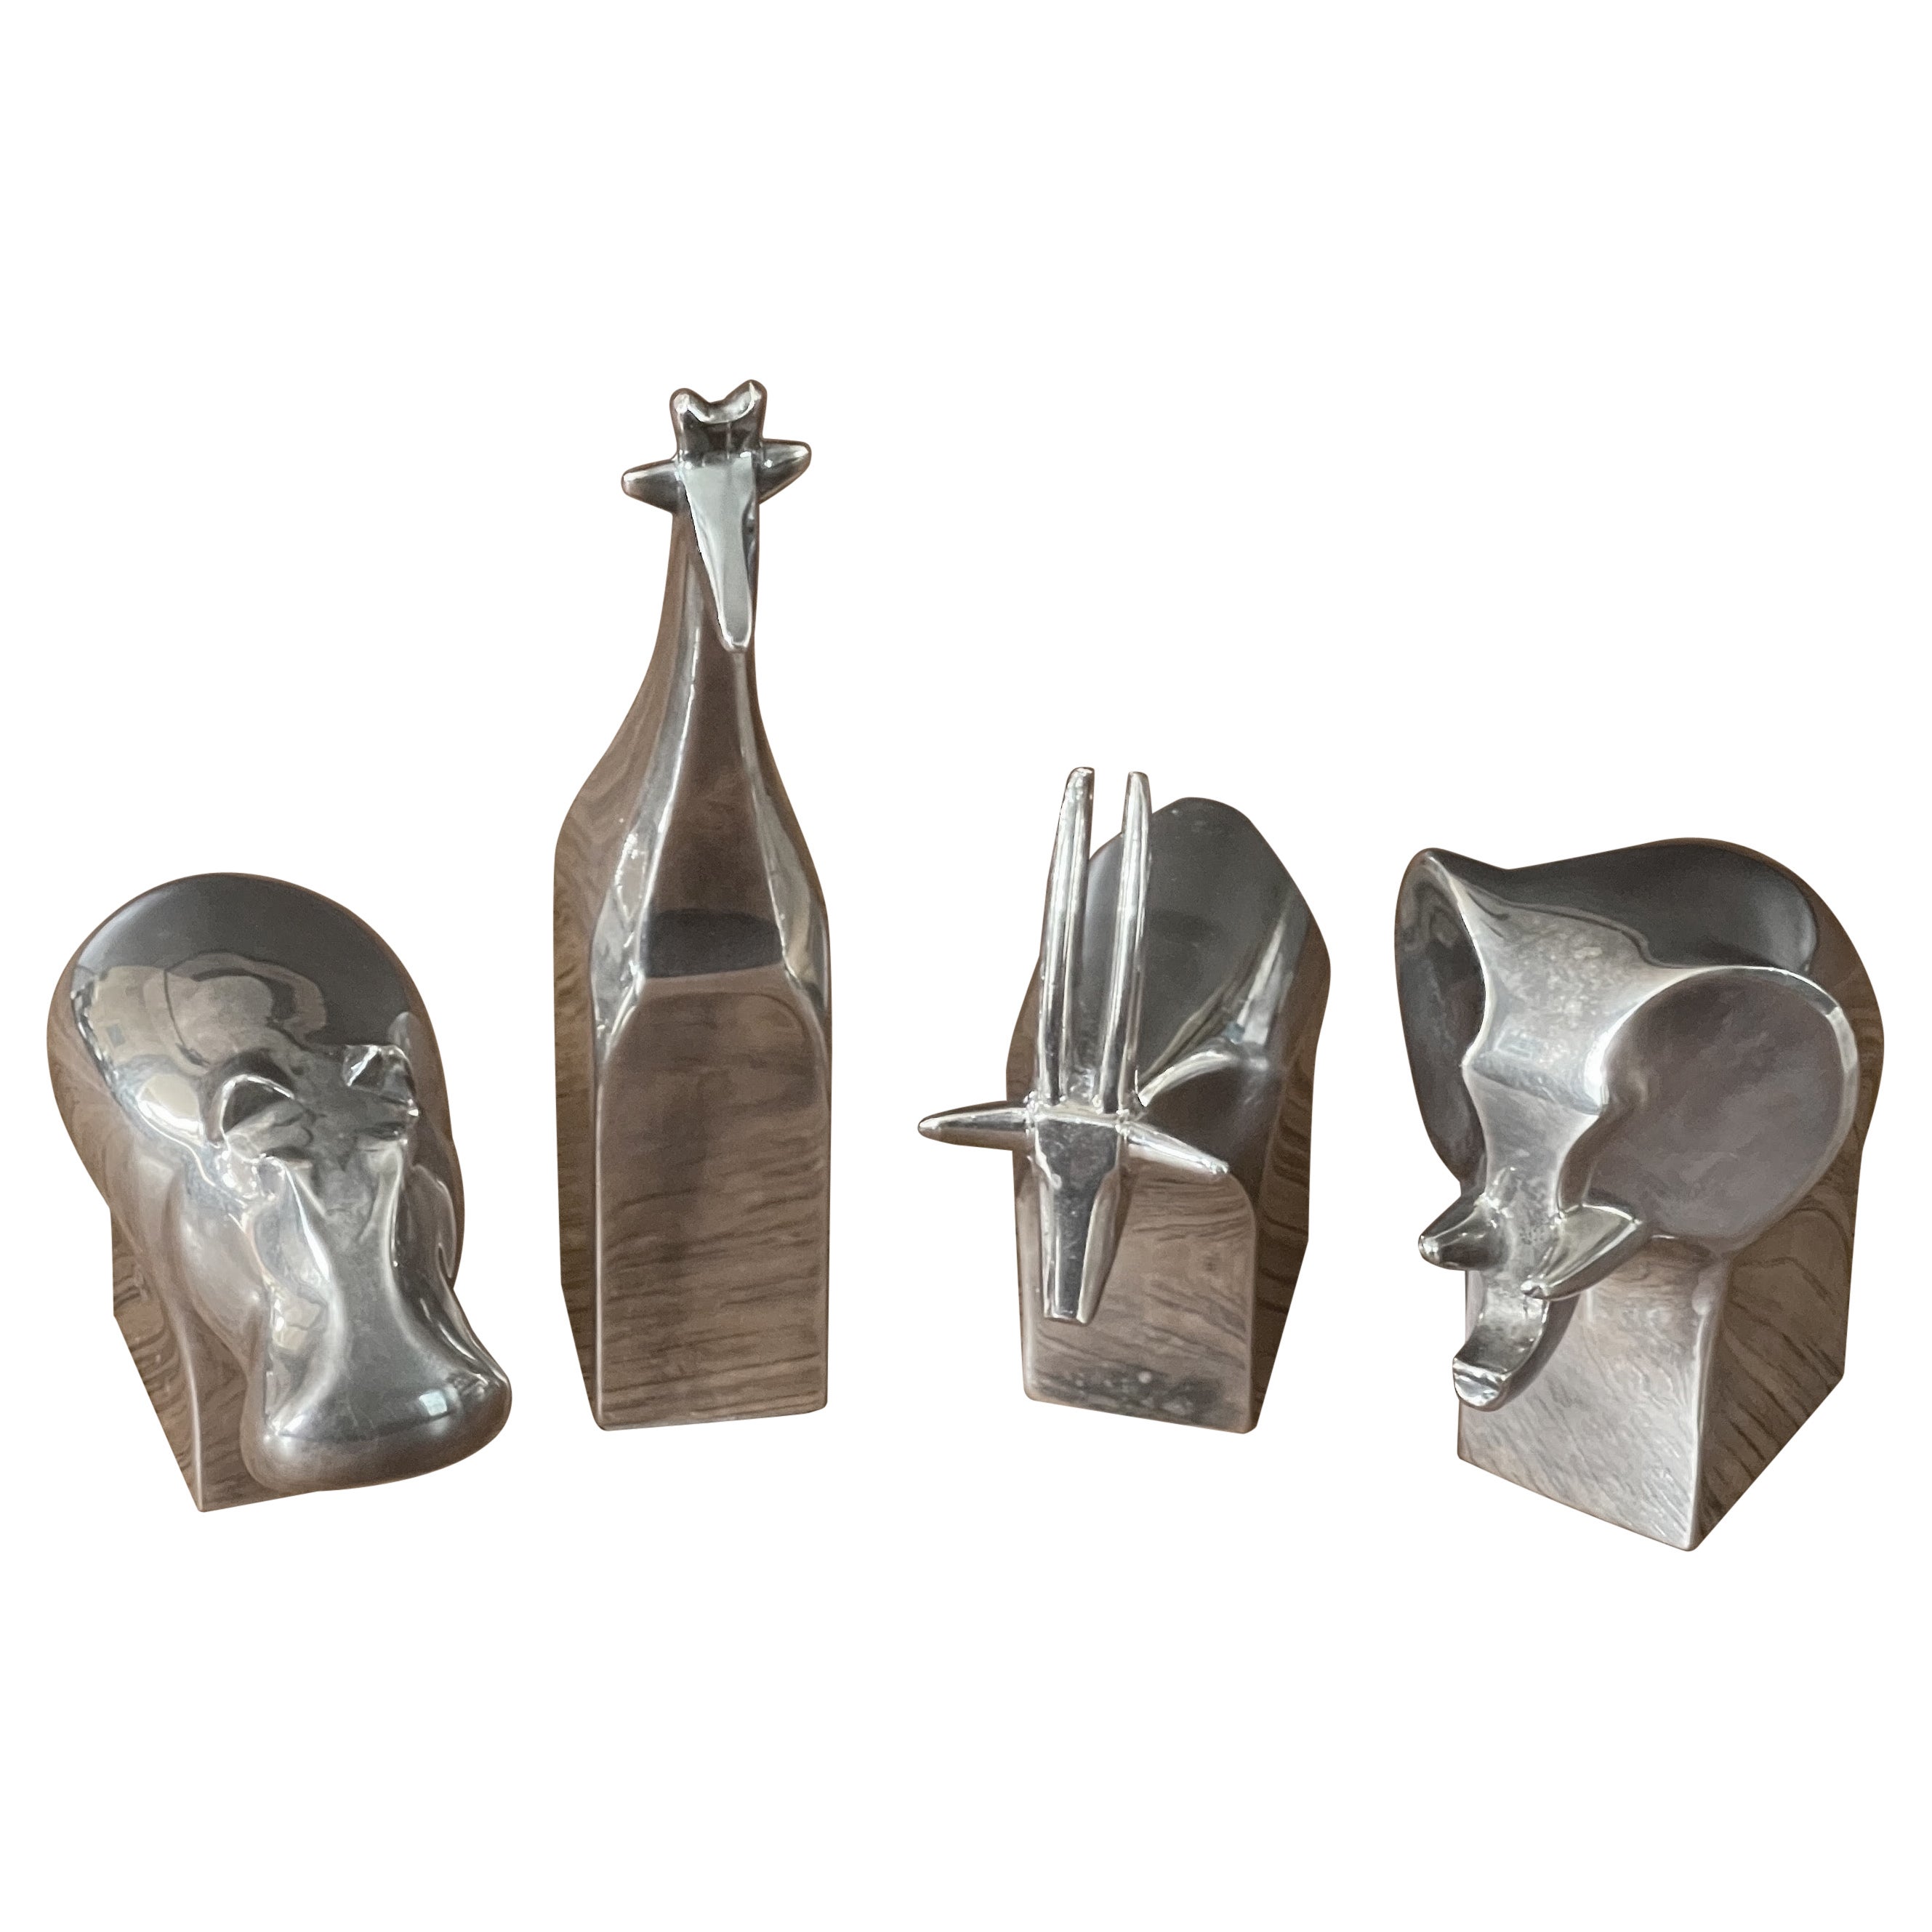 Set of Four Plated Animal Paperweights by Gunnar Cyren for Dansk